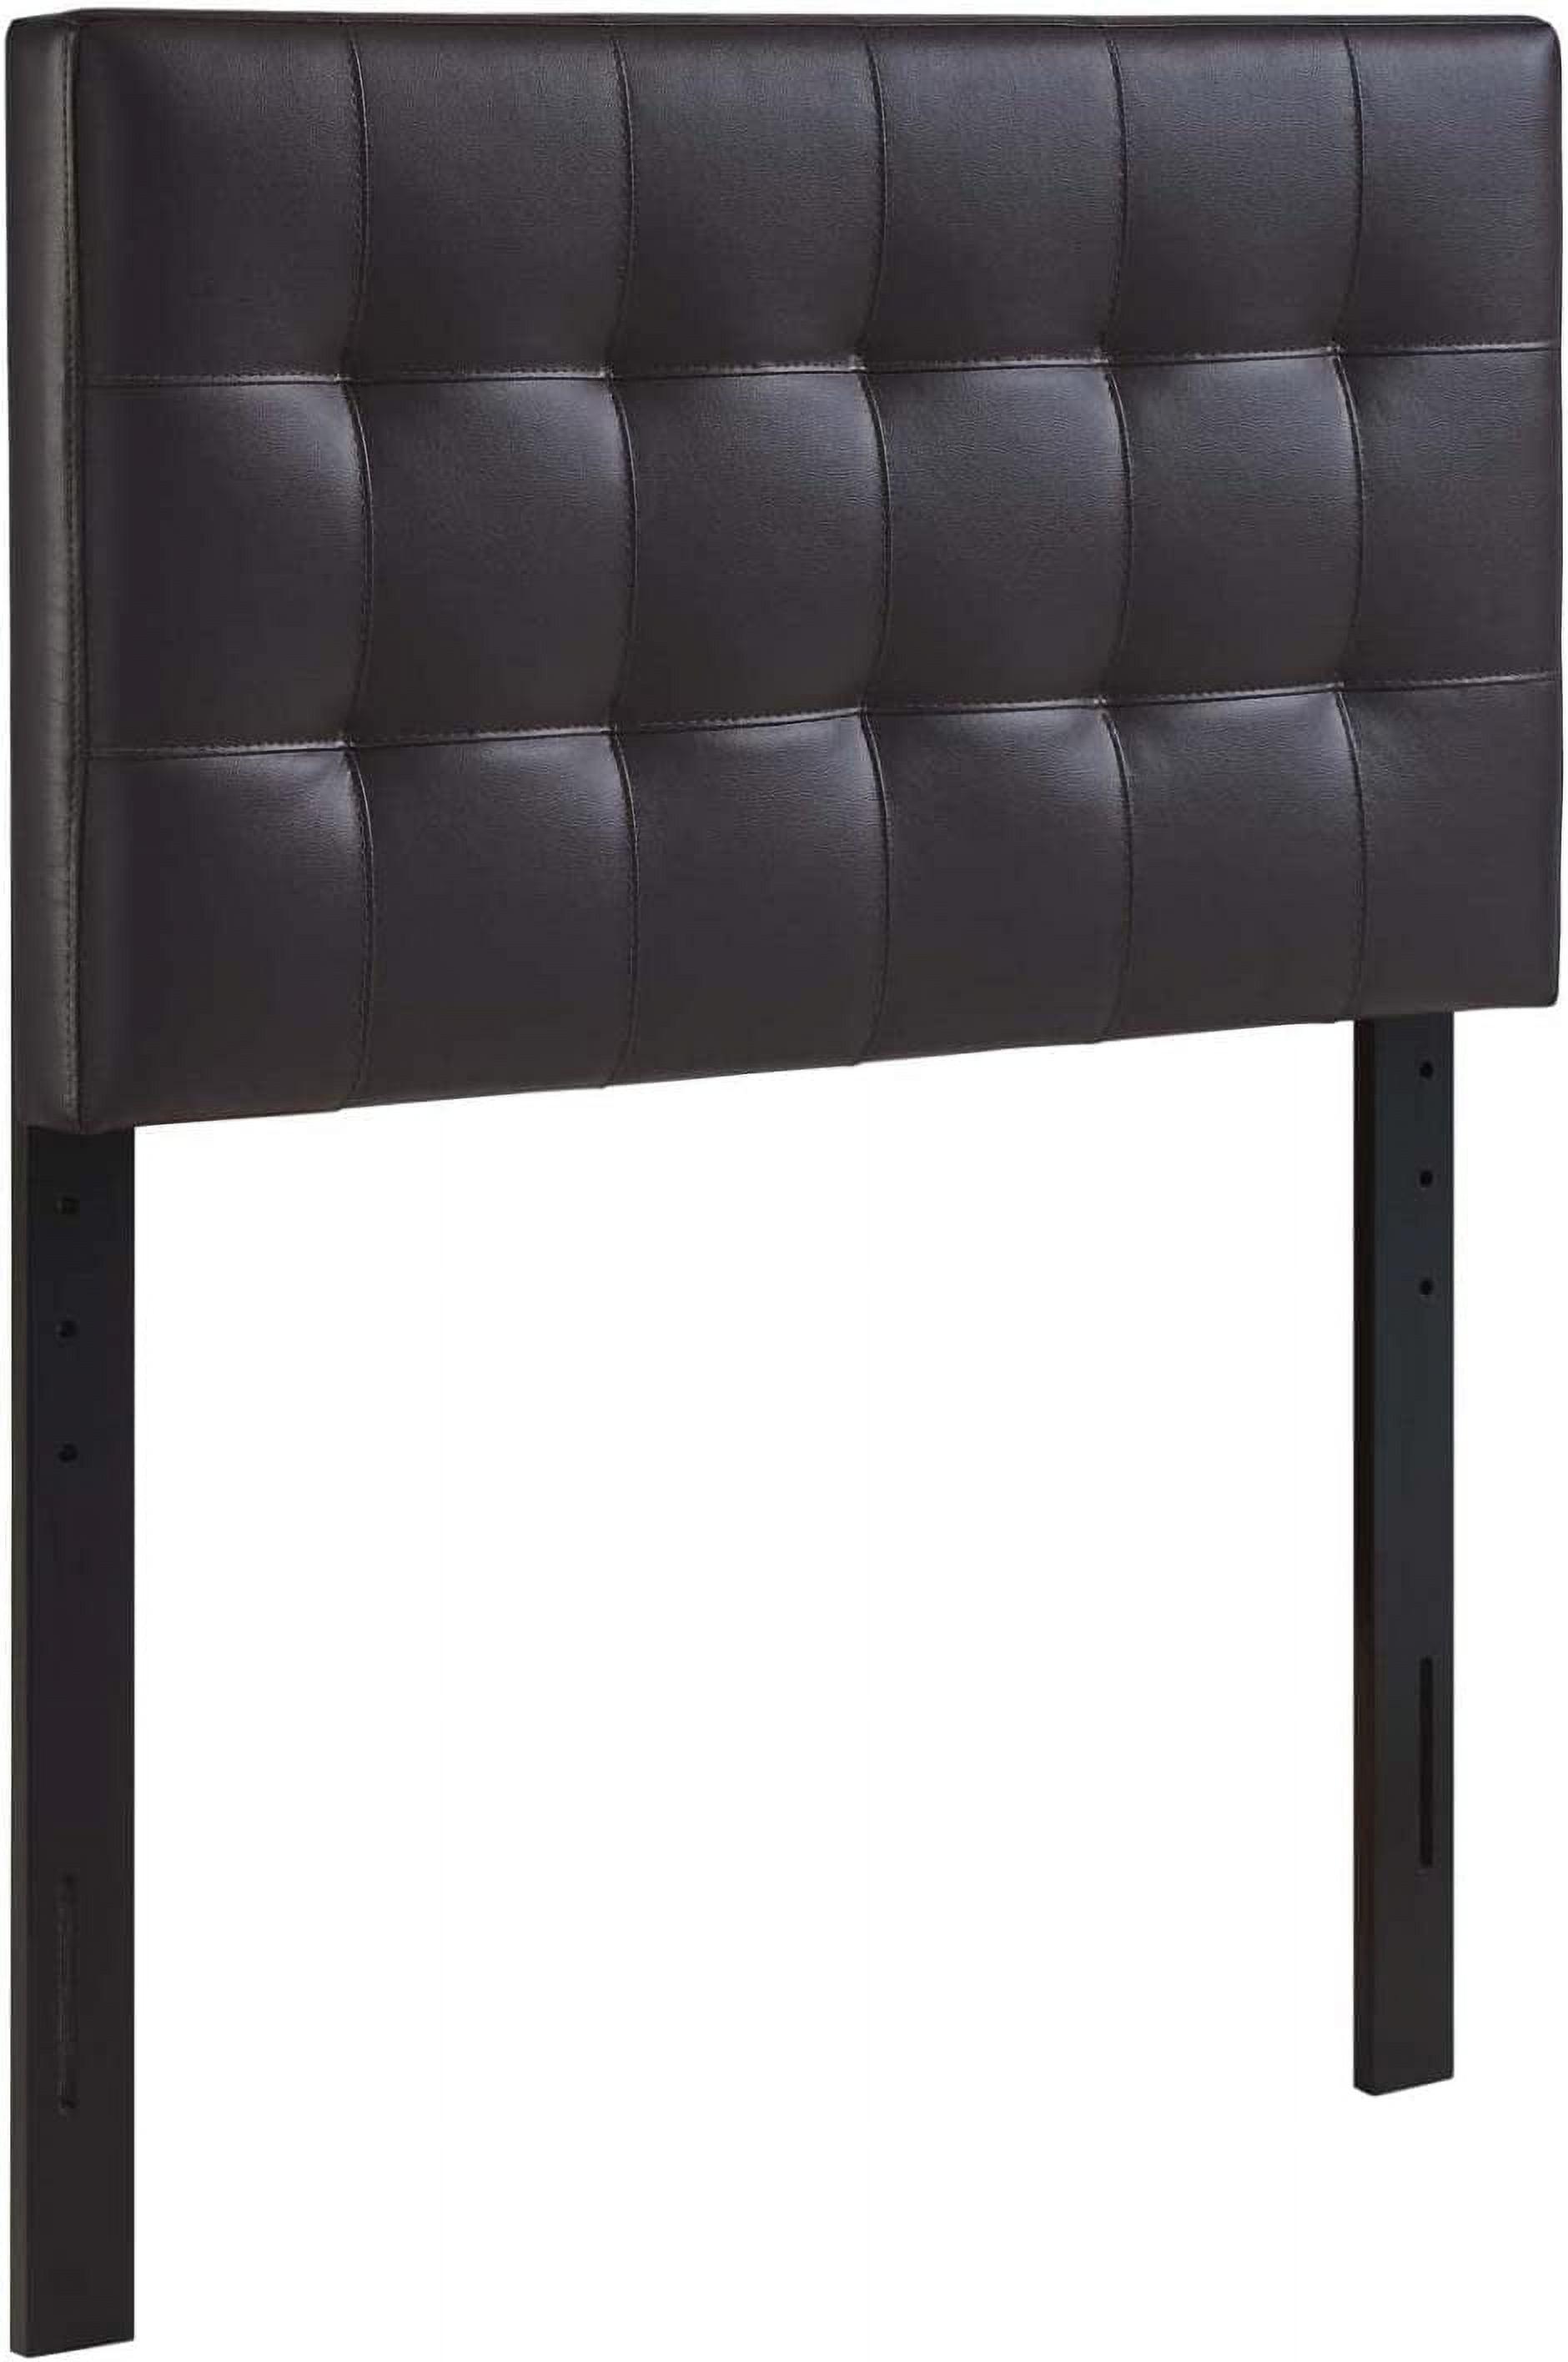 Lavish Lily Tufted Faux Leather Twin Headboard in Rich Brown